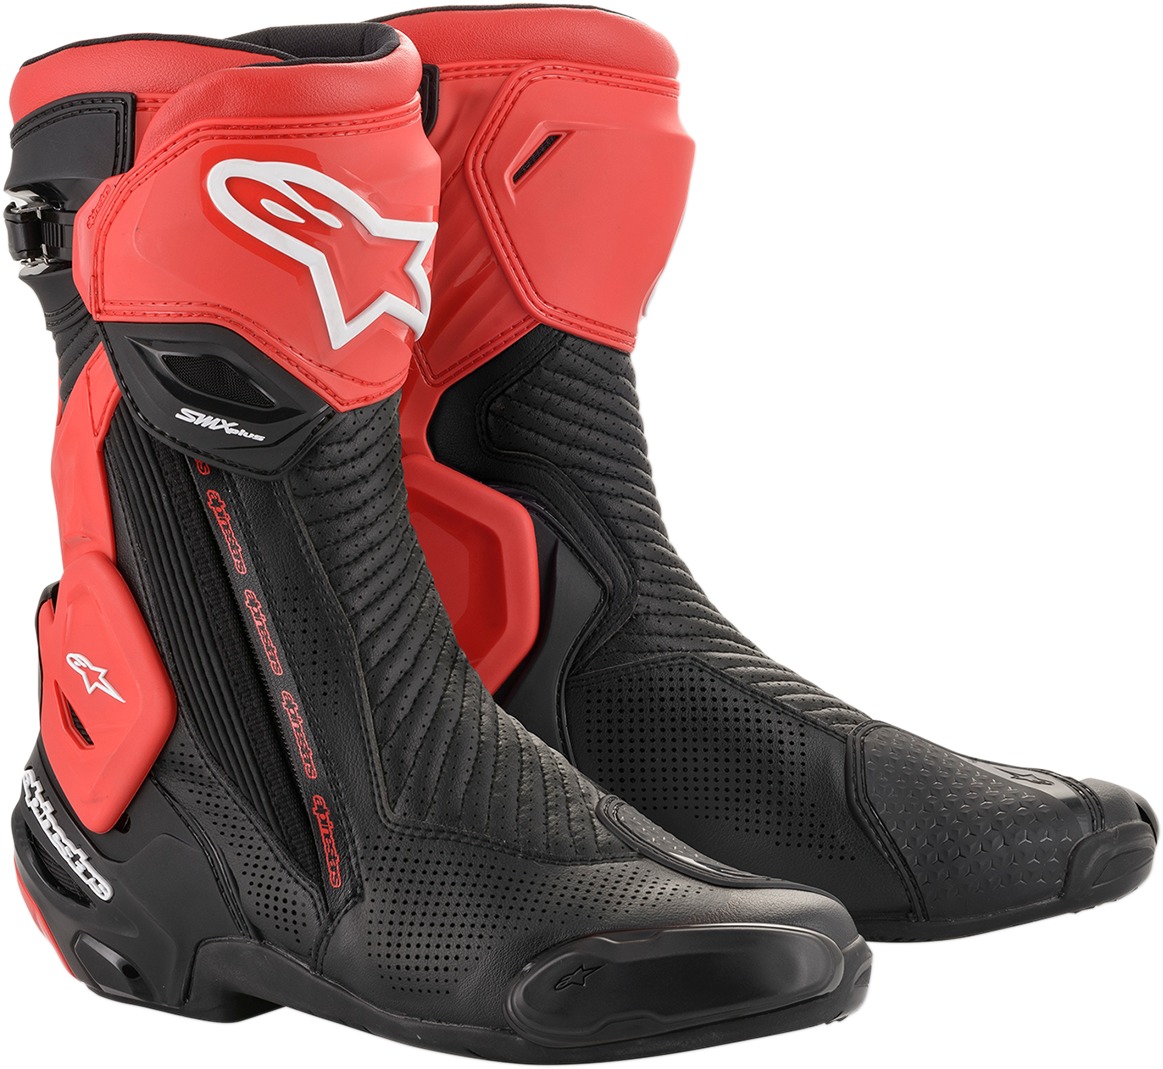 SMX Plus Street Riding Boots Black/Red US 7.5 - Click Image to Close